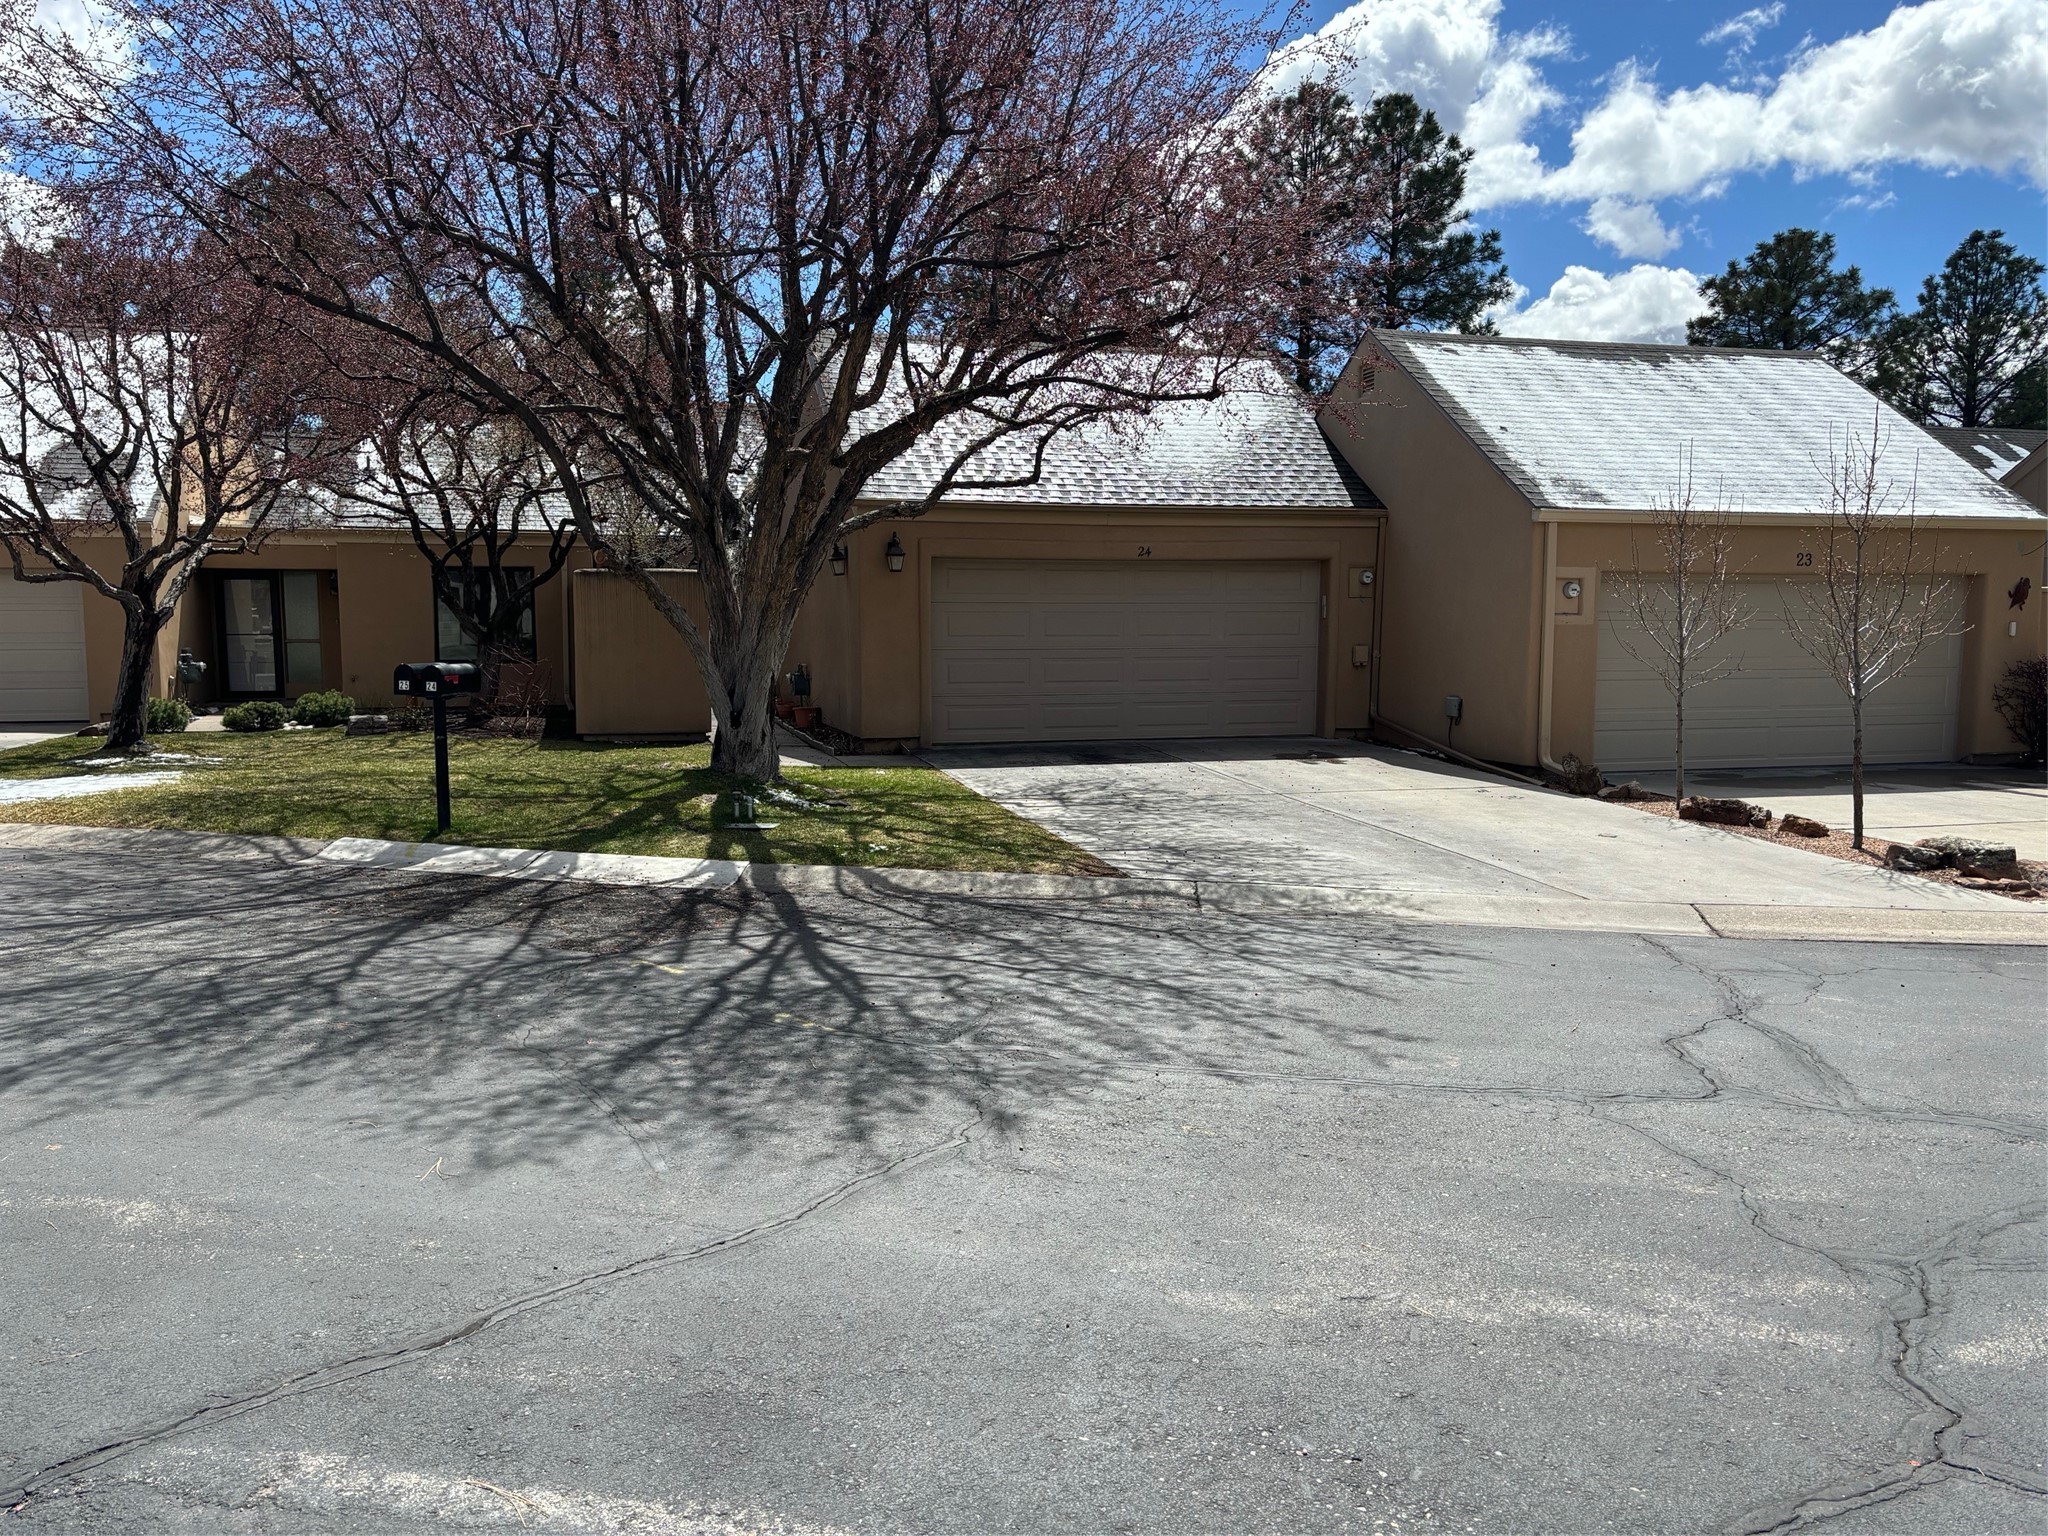 24 Timber Ridge, Los Alamos, New Mexico 87544, 2 Bedrooms Bedrooms, ,2 BathroomsBathrooms,Residential,For Sale,24 Timber Ridge,202401161